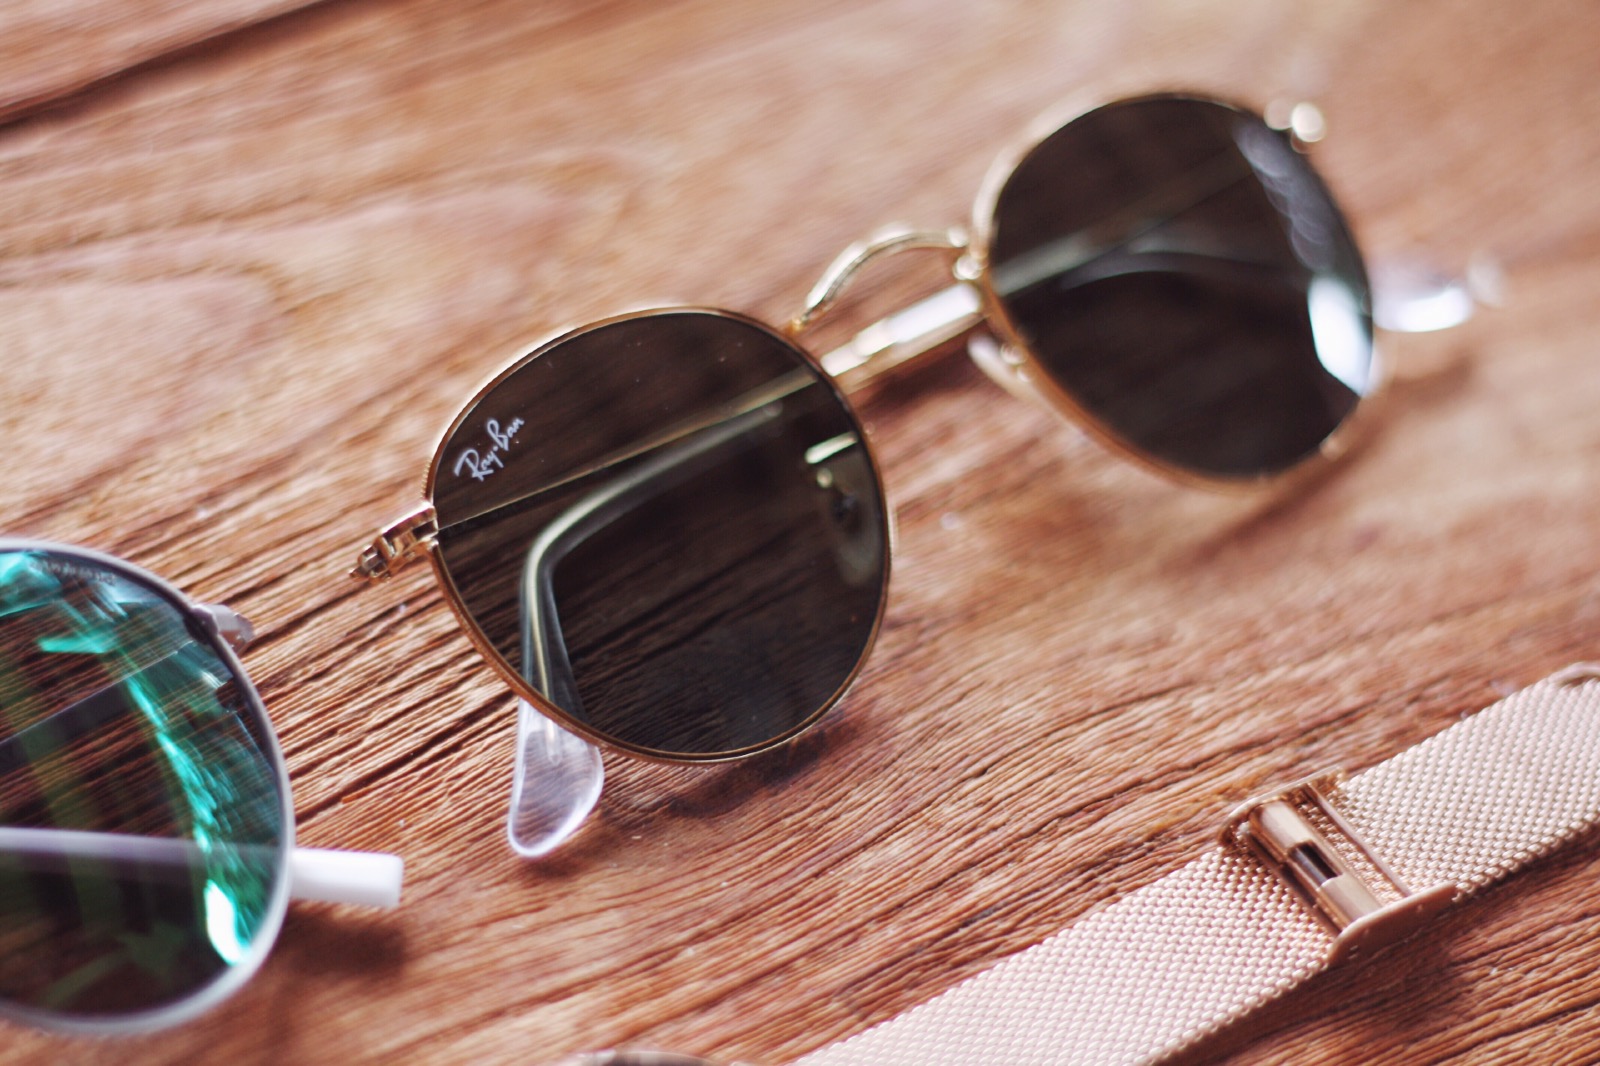 itsgoldie_itsgoldie_modeblog_hannover_fashionblog_brandfield_sonnenbrille_cluse_uhr_polaroid_ray_ban_sommer_accessoires_trends_tipps_shopping